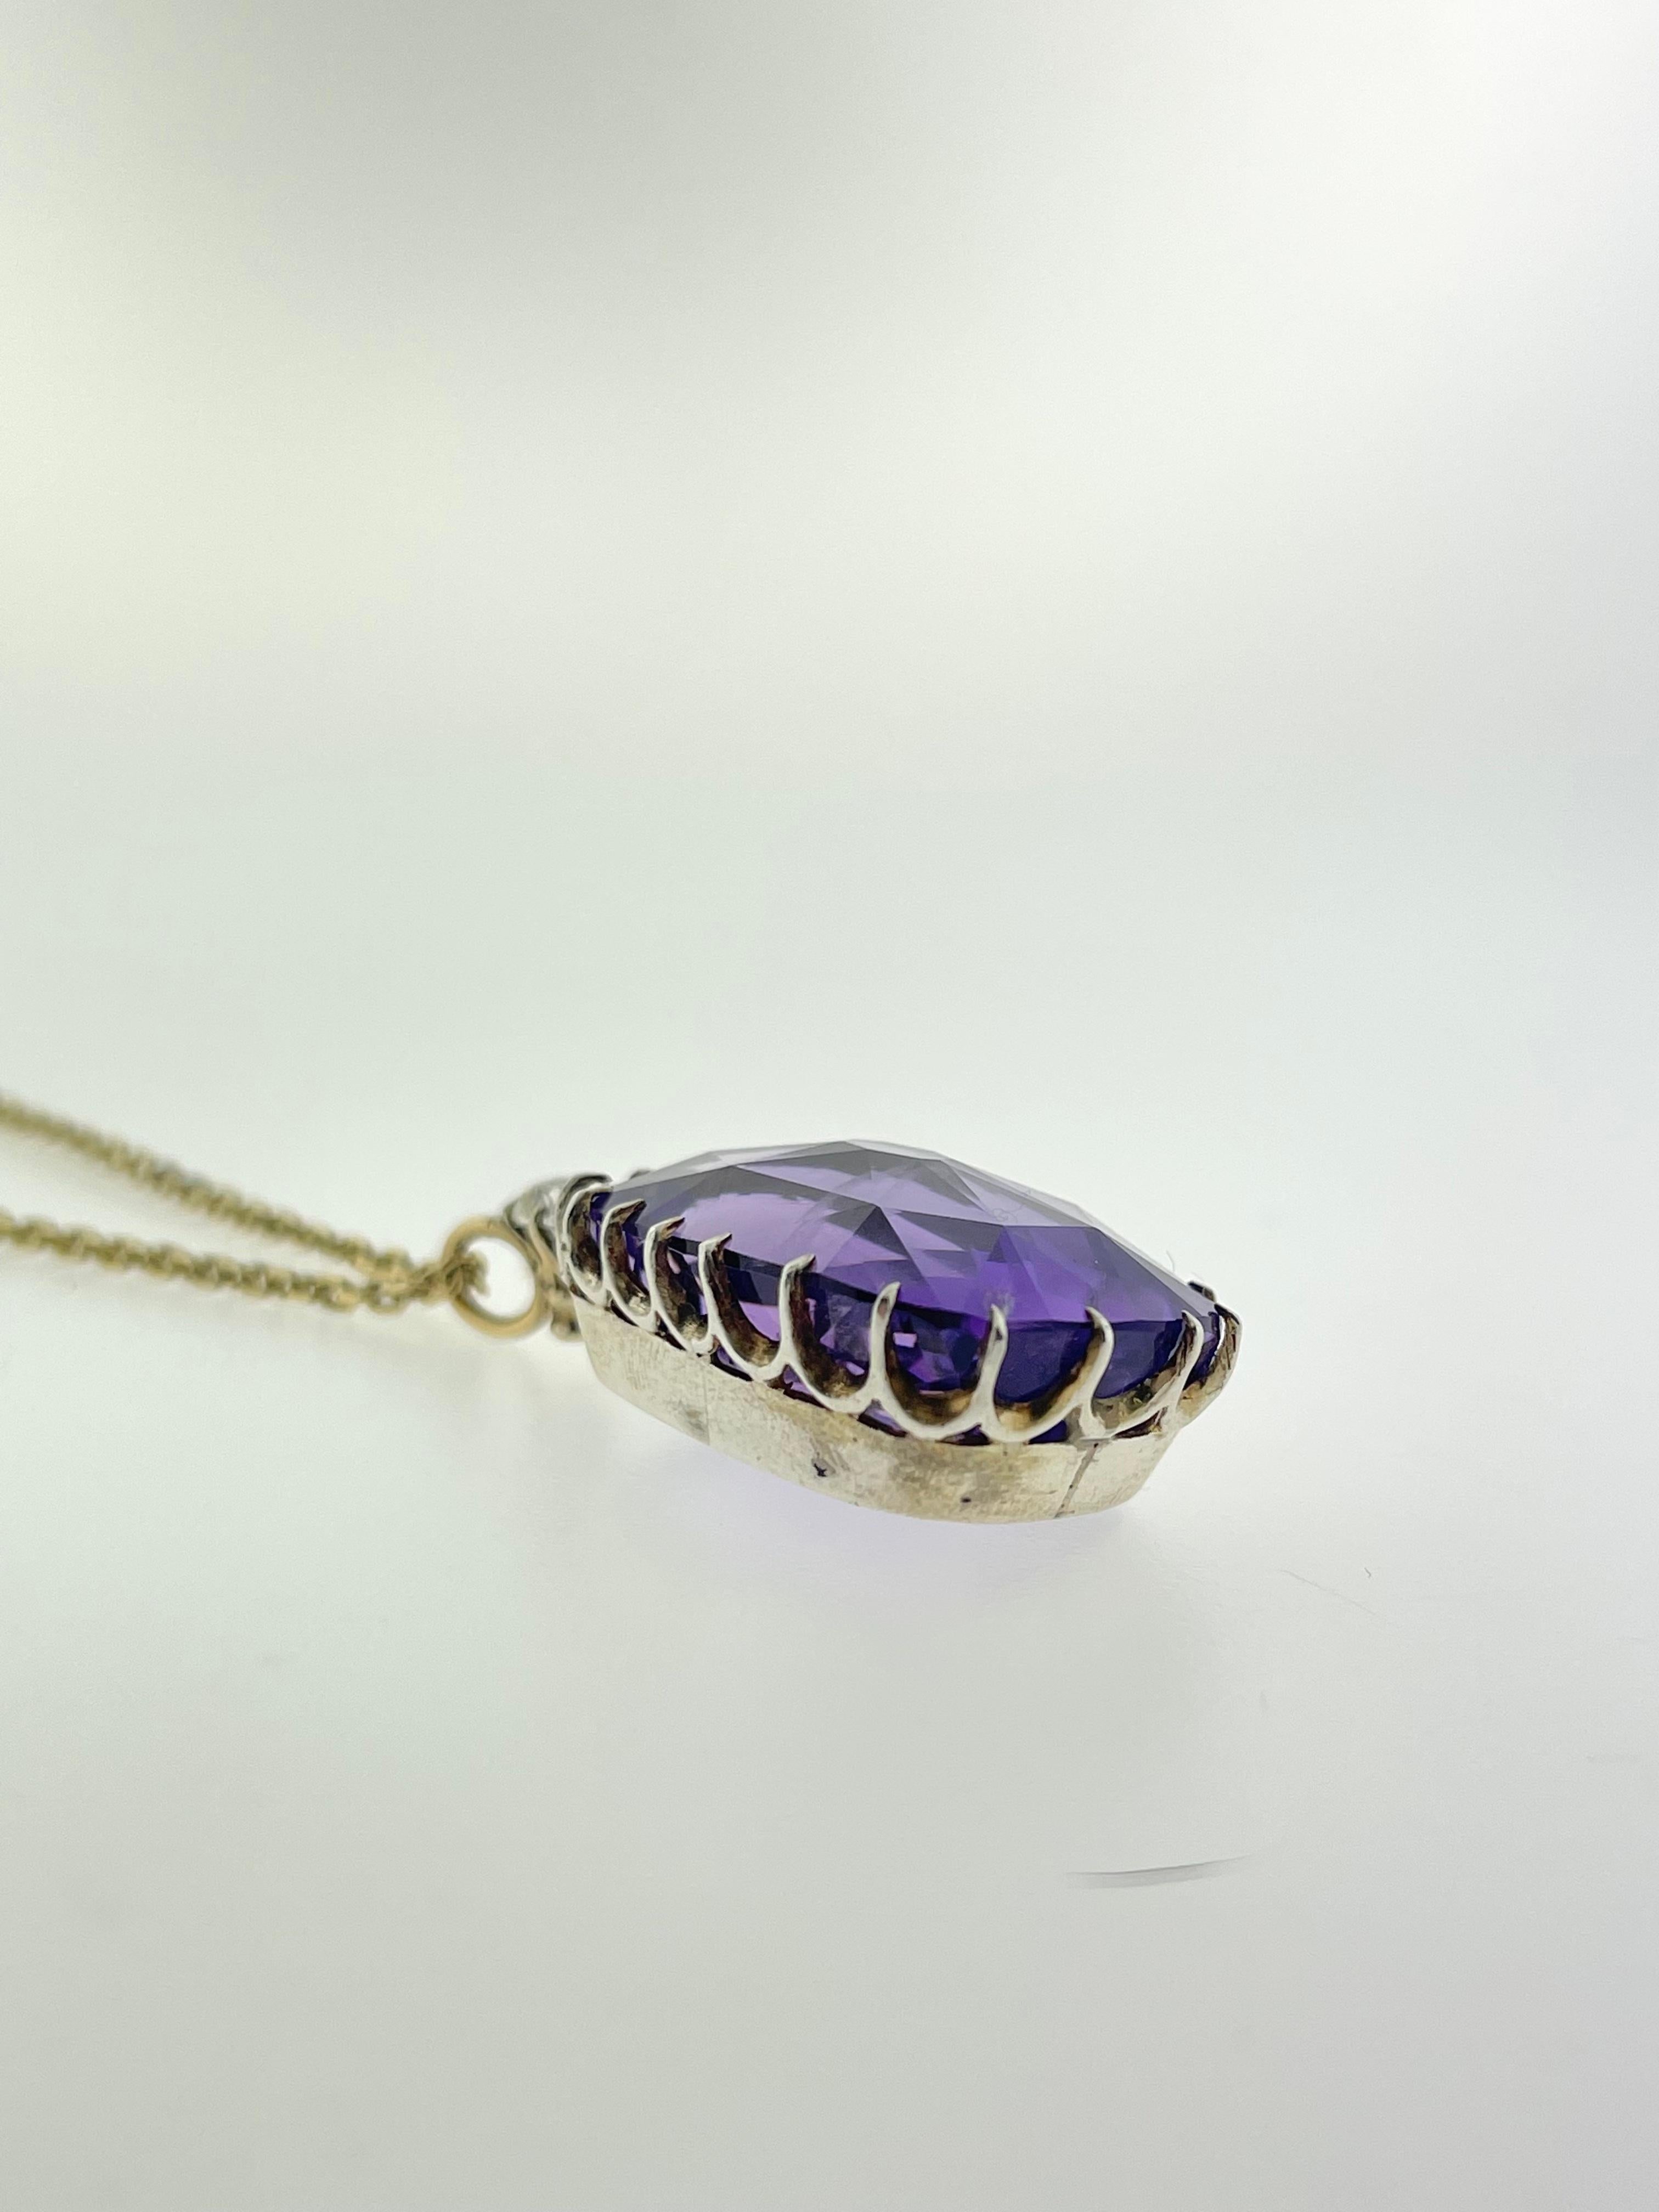 Antique Cushion Cut Amethyst Pendant In New Condition For Sale In Los Angeles, CA